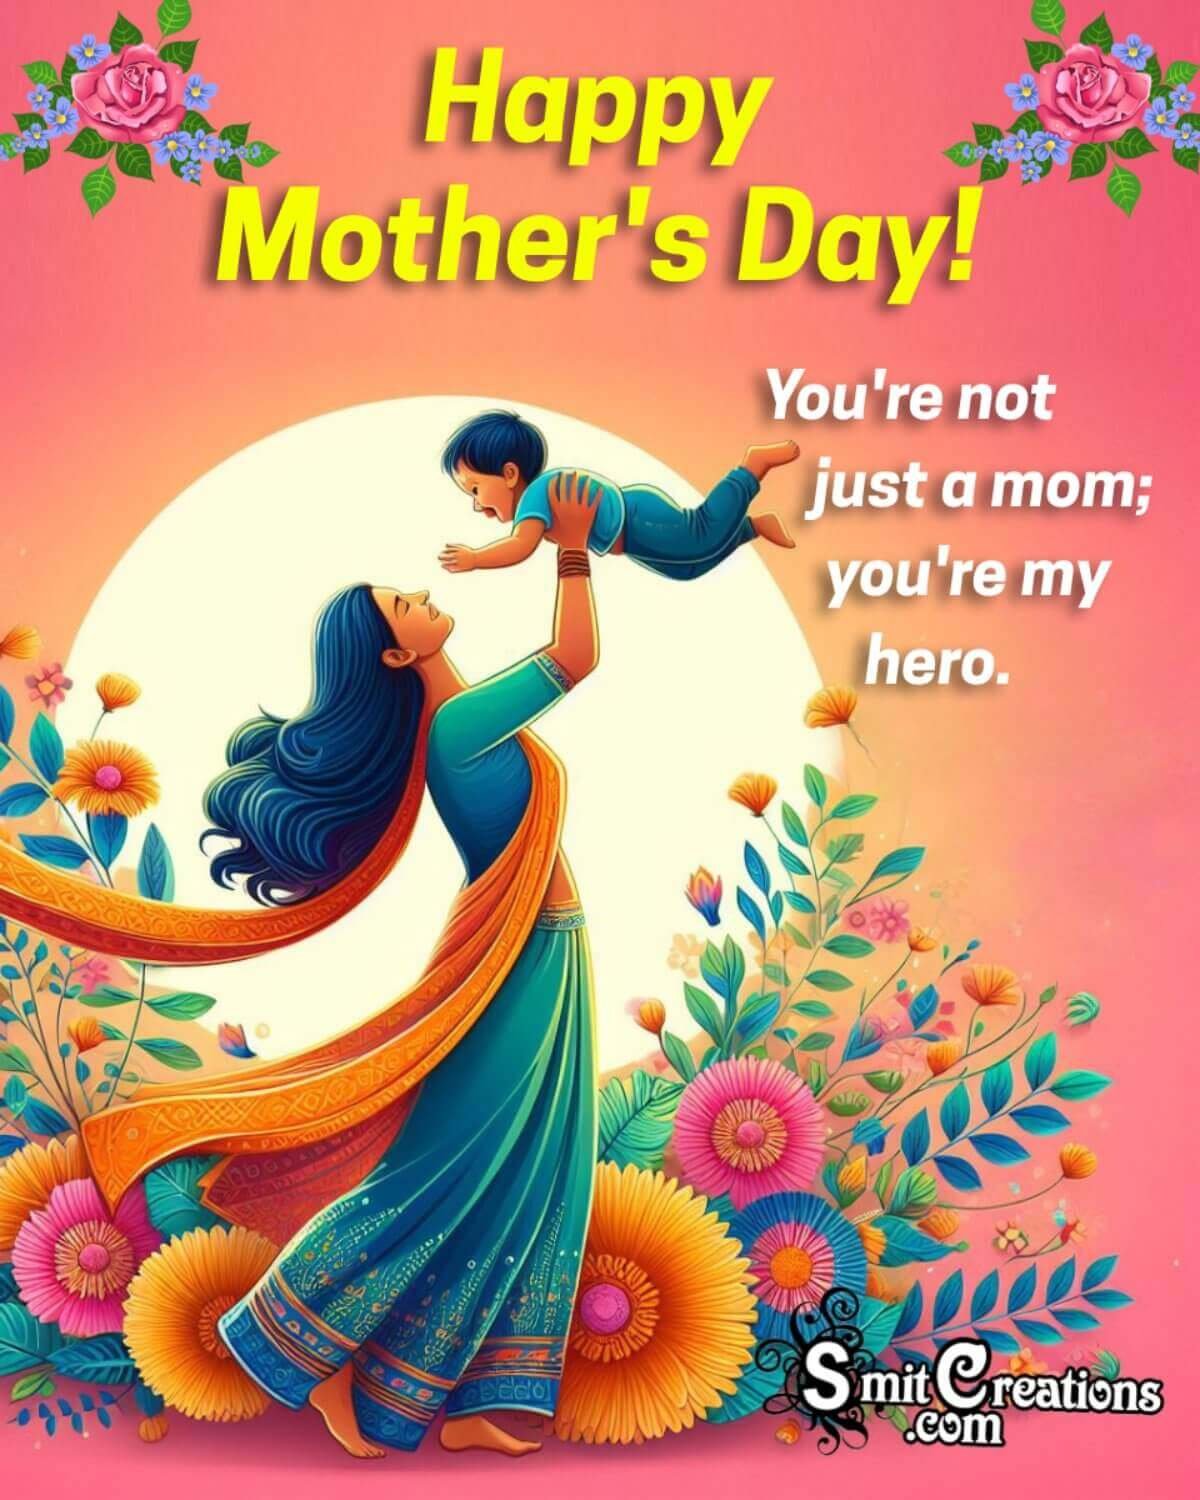 Fantastic Happy Mother’s Day Greeting Photo